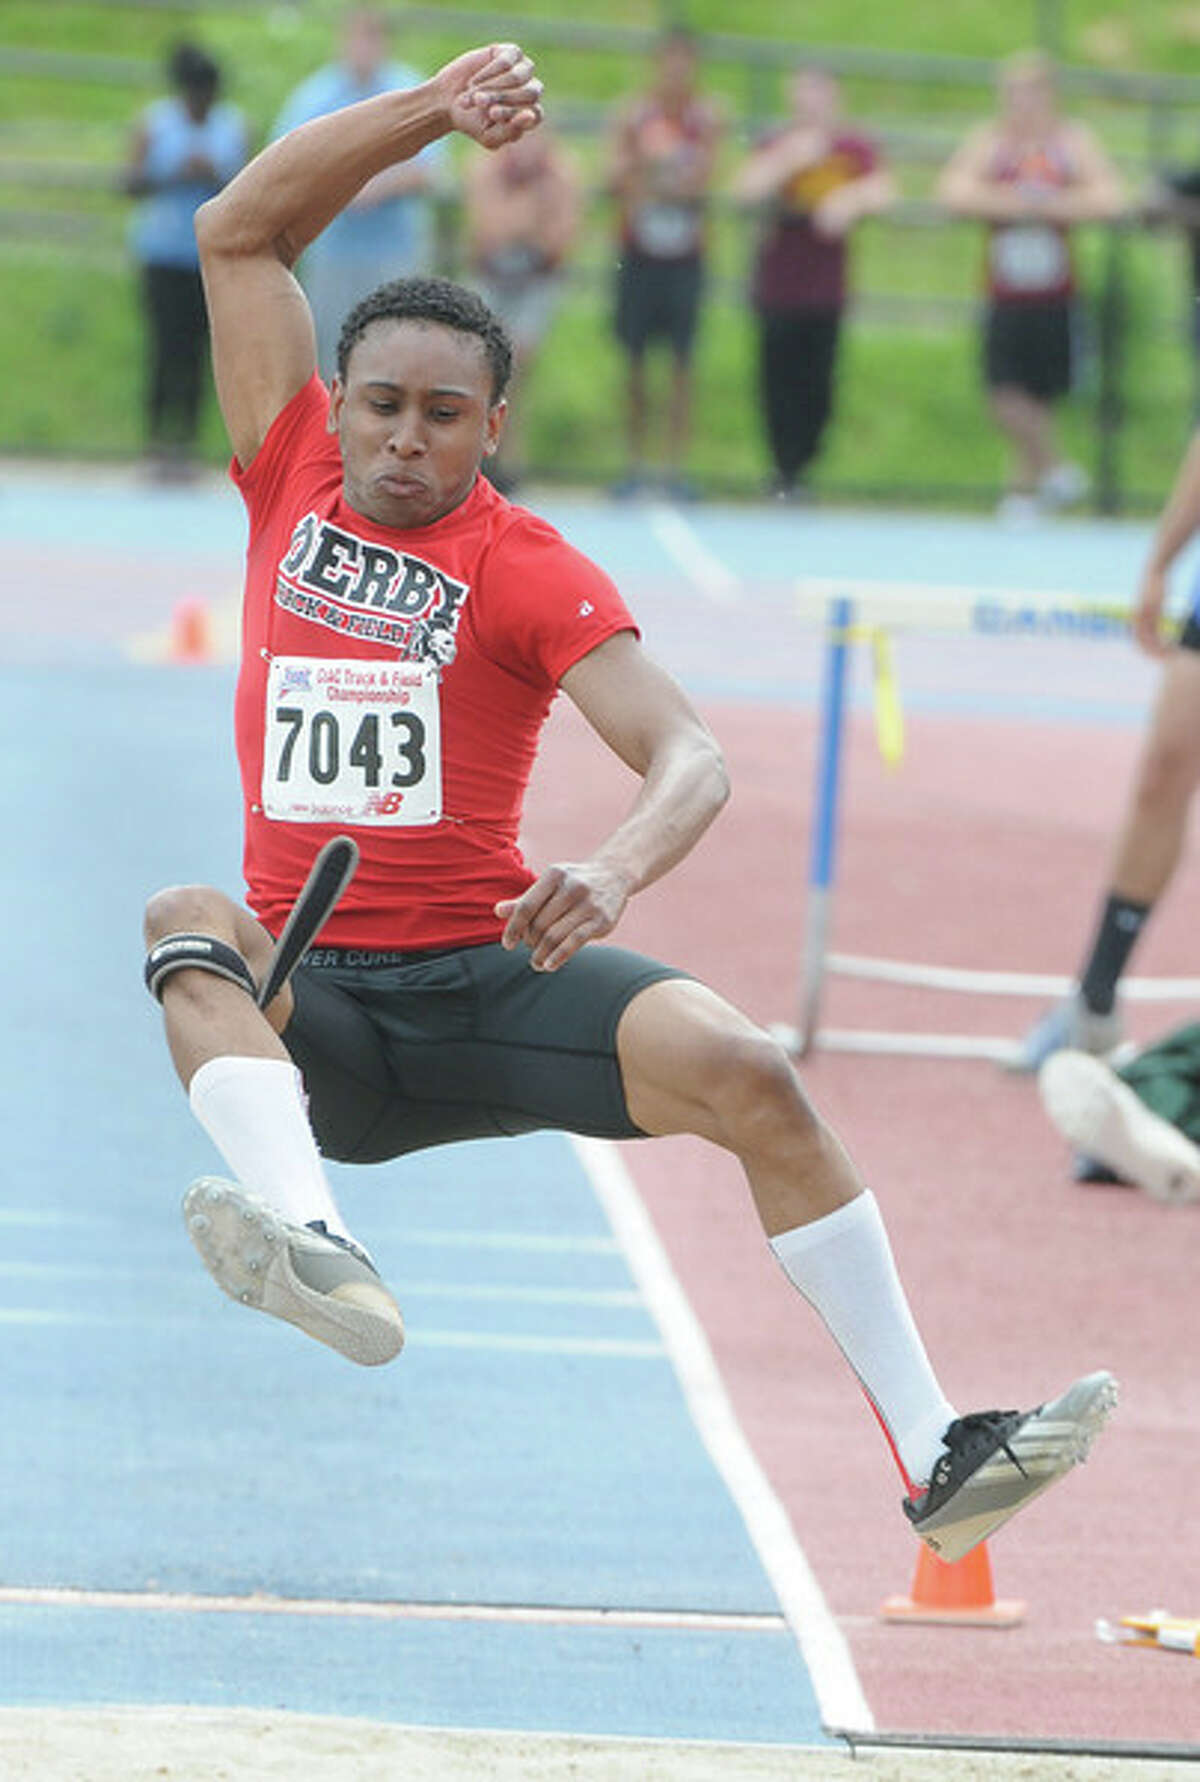 Preston Batson of Derby came in second in the long jump. (Mara Lavitt – New Haven Register)